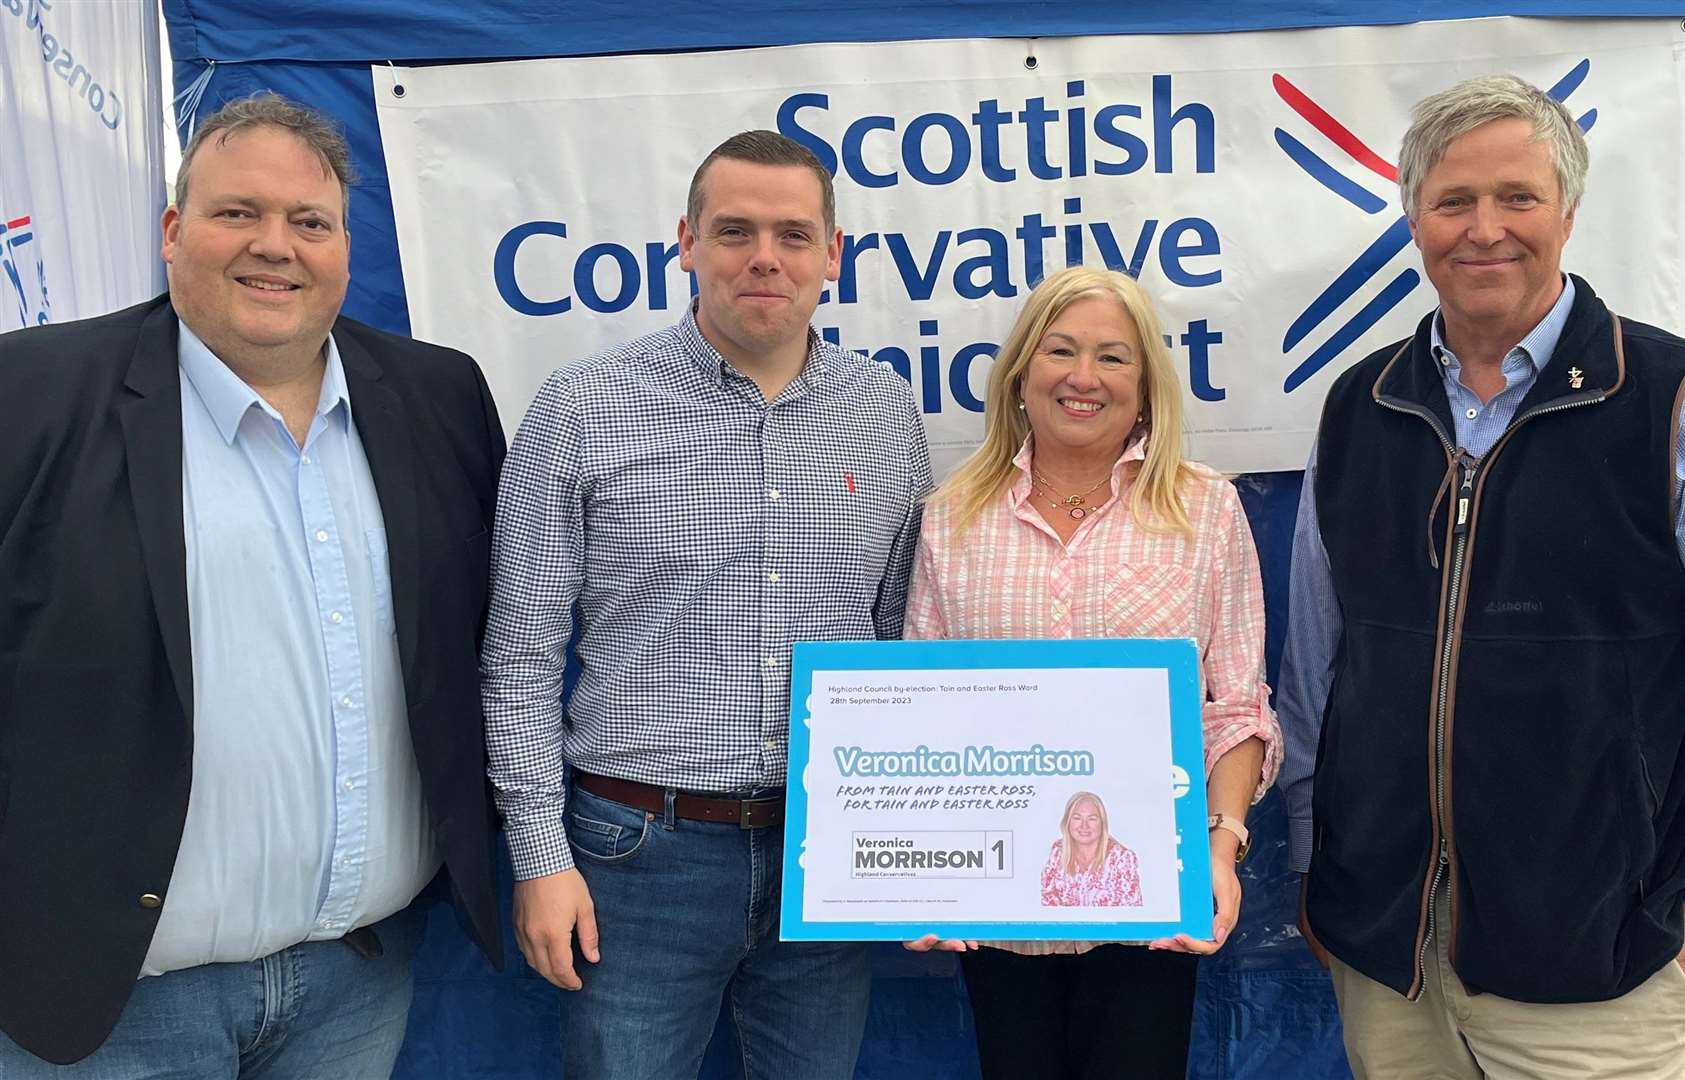 Veronica Morrison is being backed by (from left) Highland MSP Jamie Halcro Johnston, Scottish Conservative leader Douglas Ross and Edward Mountain, Highland MSP.